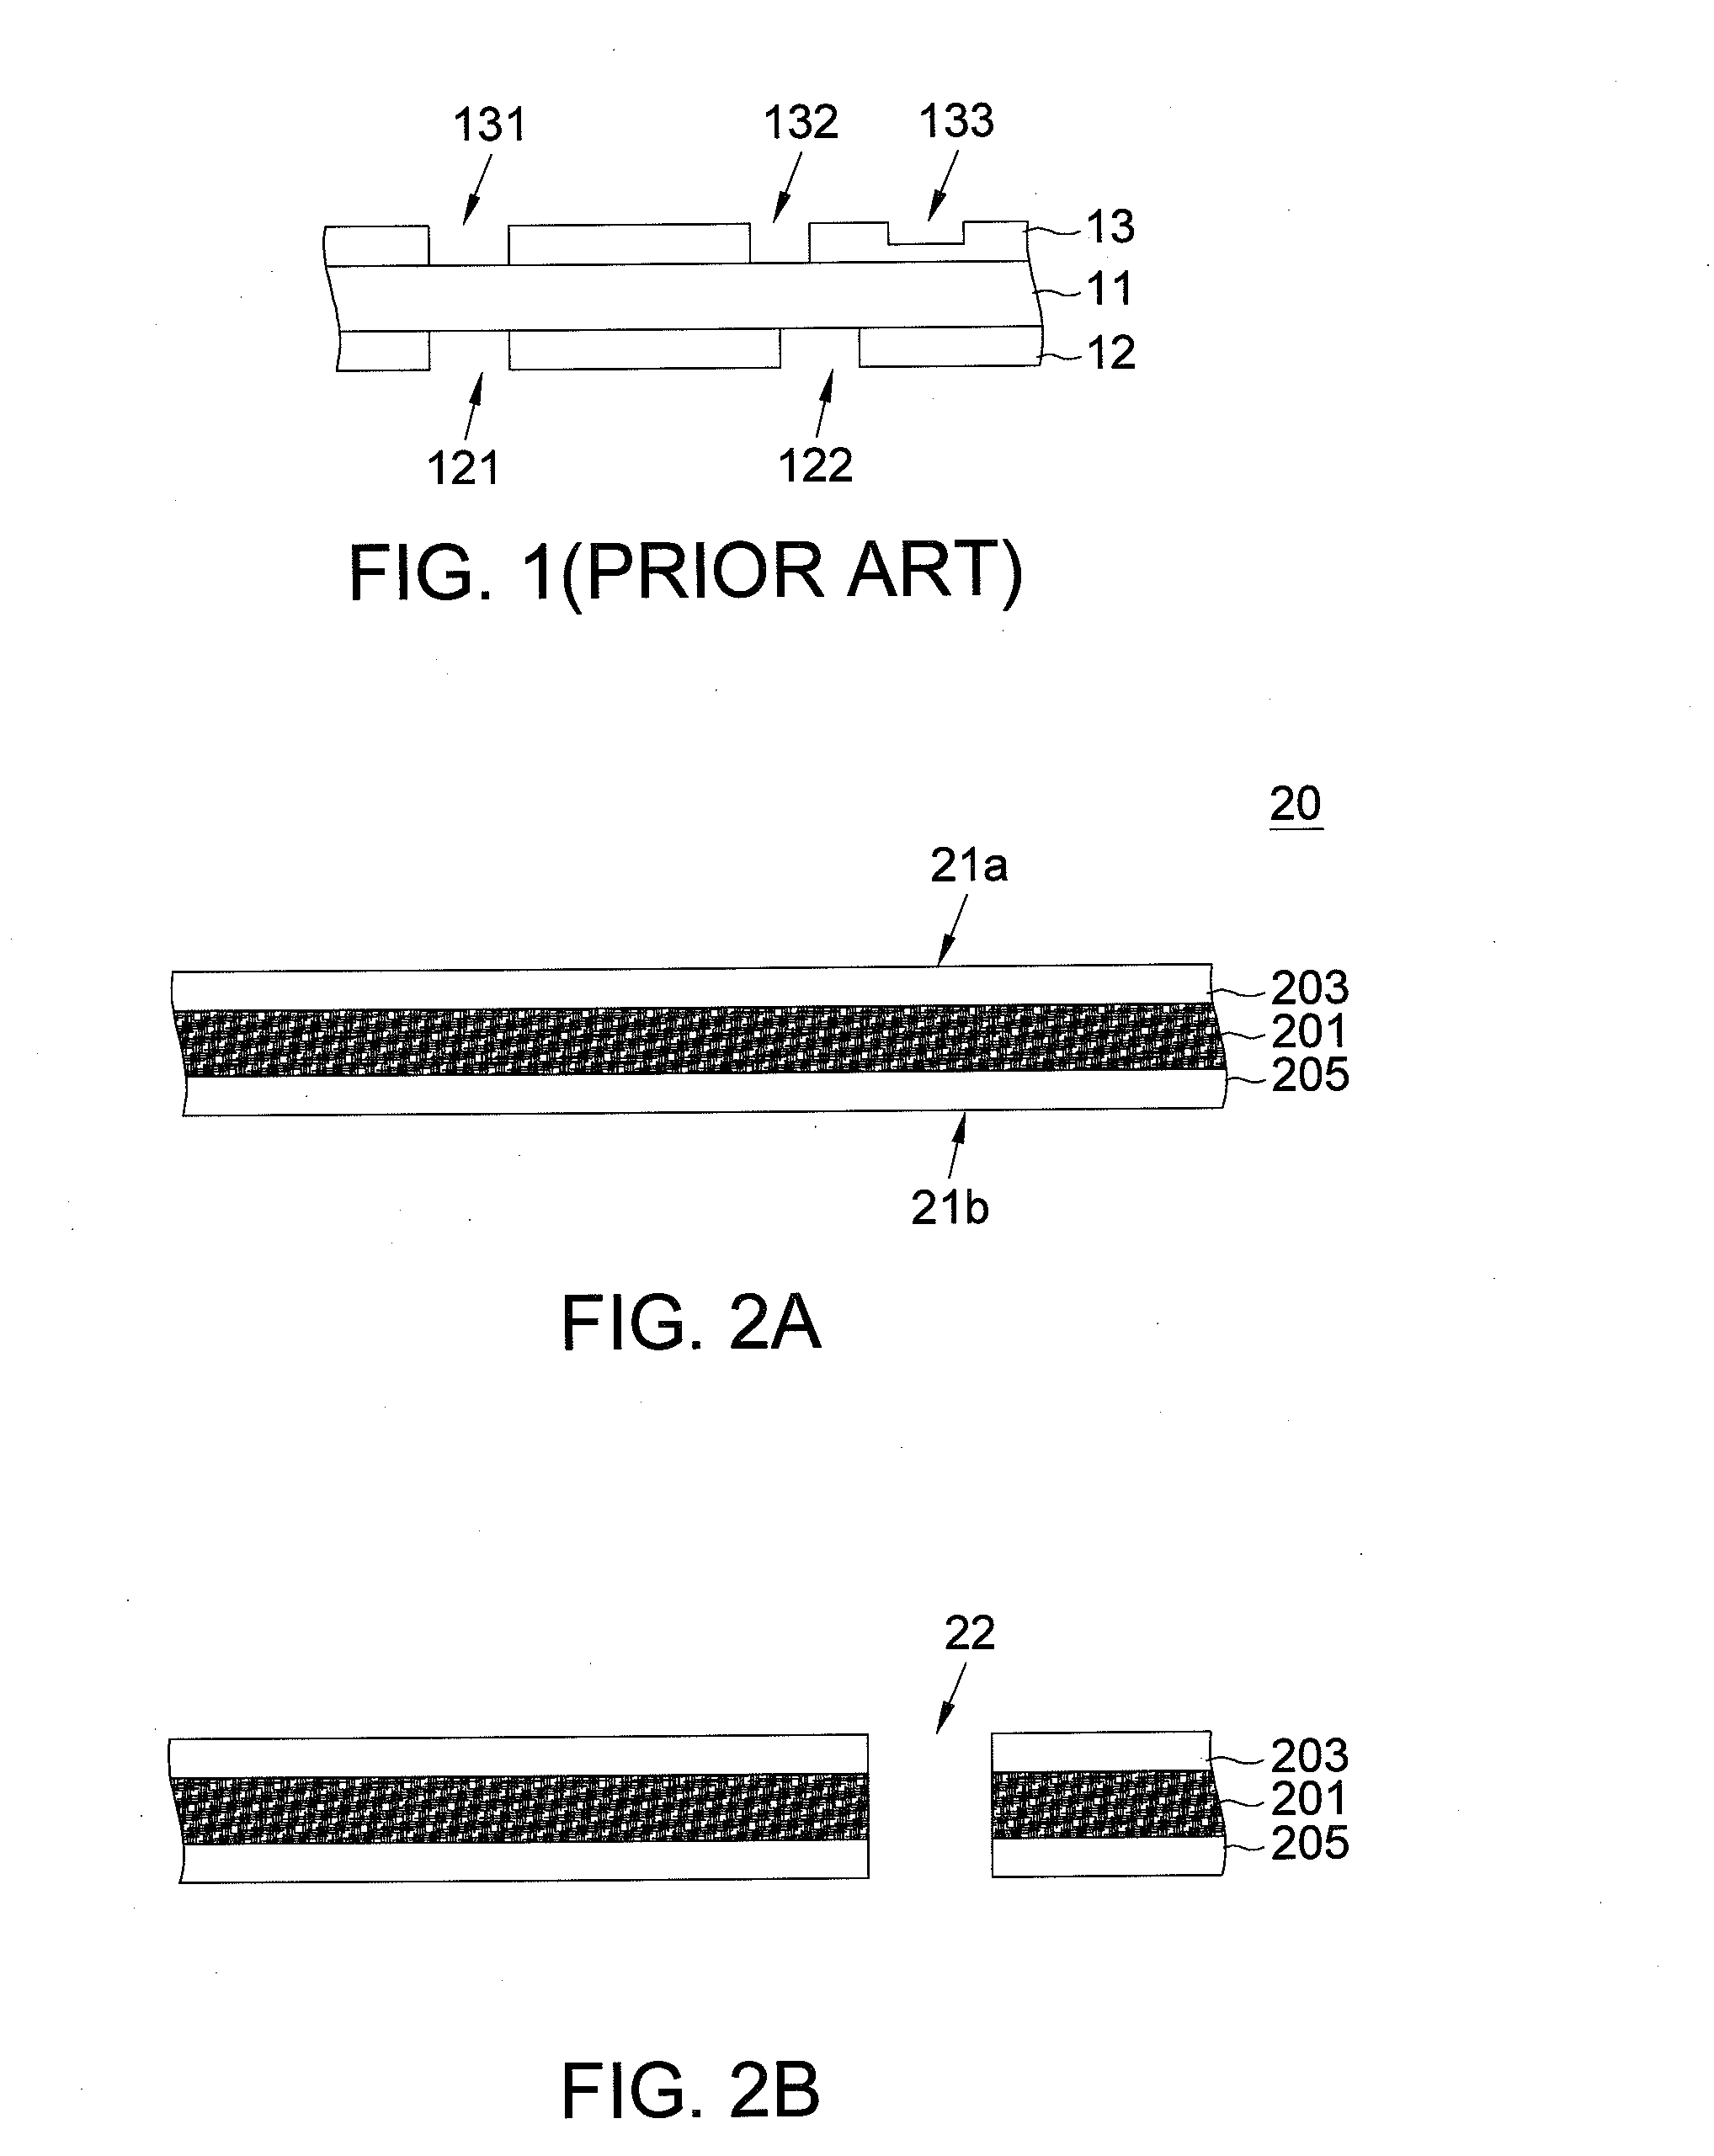 Structure of embedded-trace substrate and method of manufacturing the same